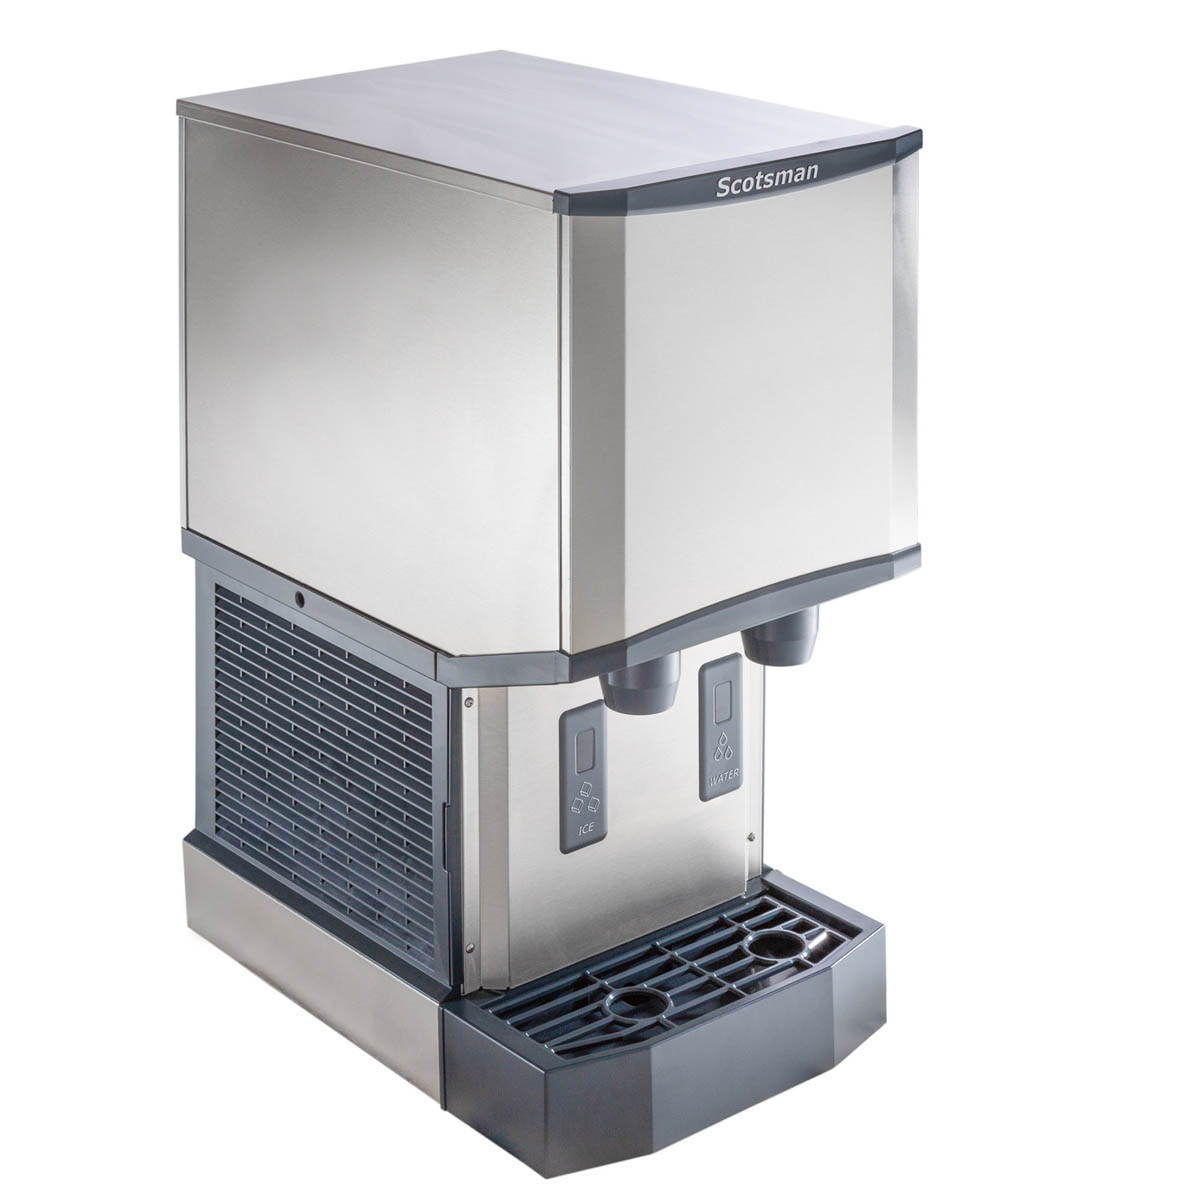 With Scotsman HID312A-1 Easy to Serve Ice For Your Customers, Chef's Deal